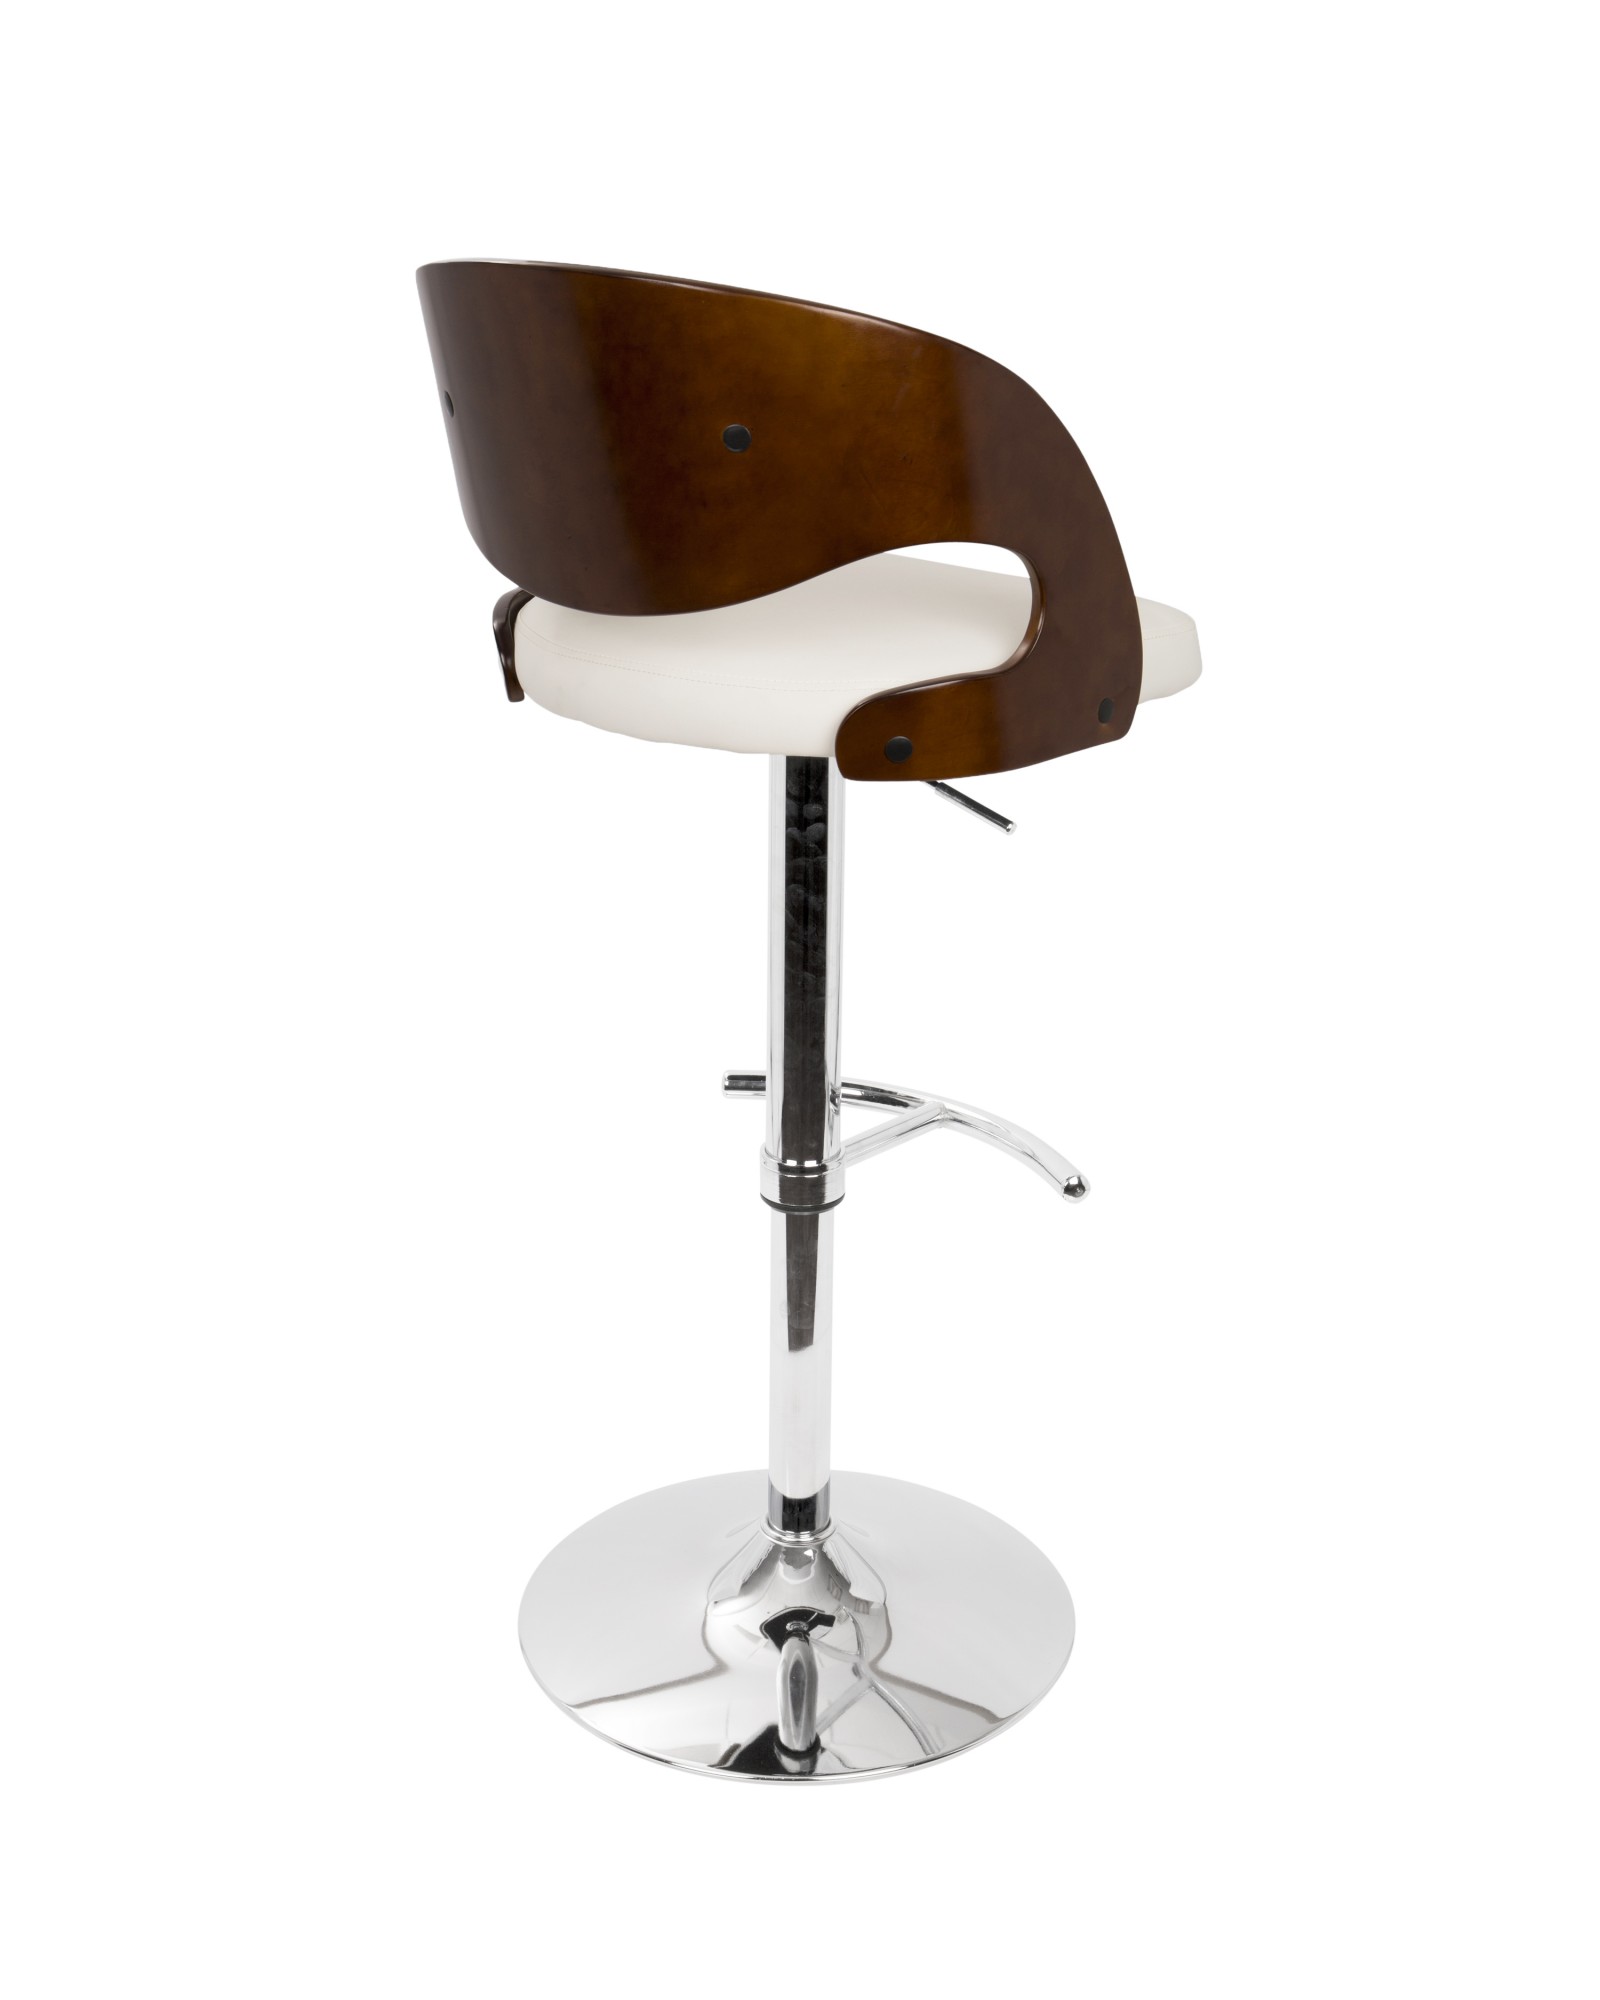 Pino Mid-Century Modern Adjustable Barstool with Swivel in Cherry and White Faux Leather